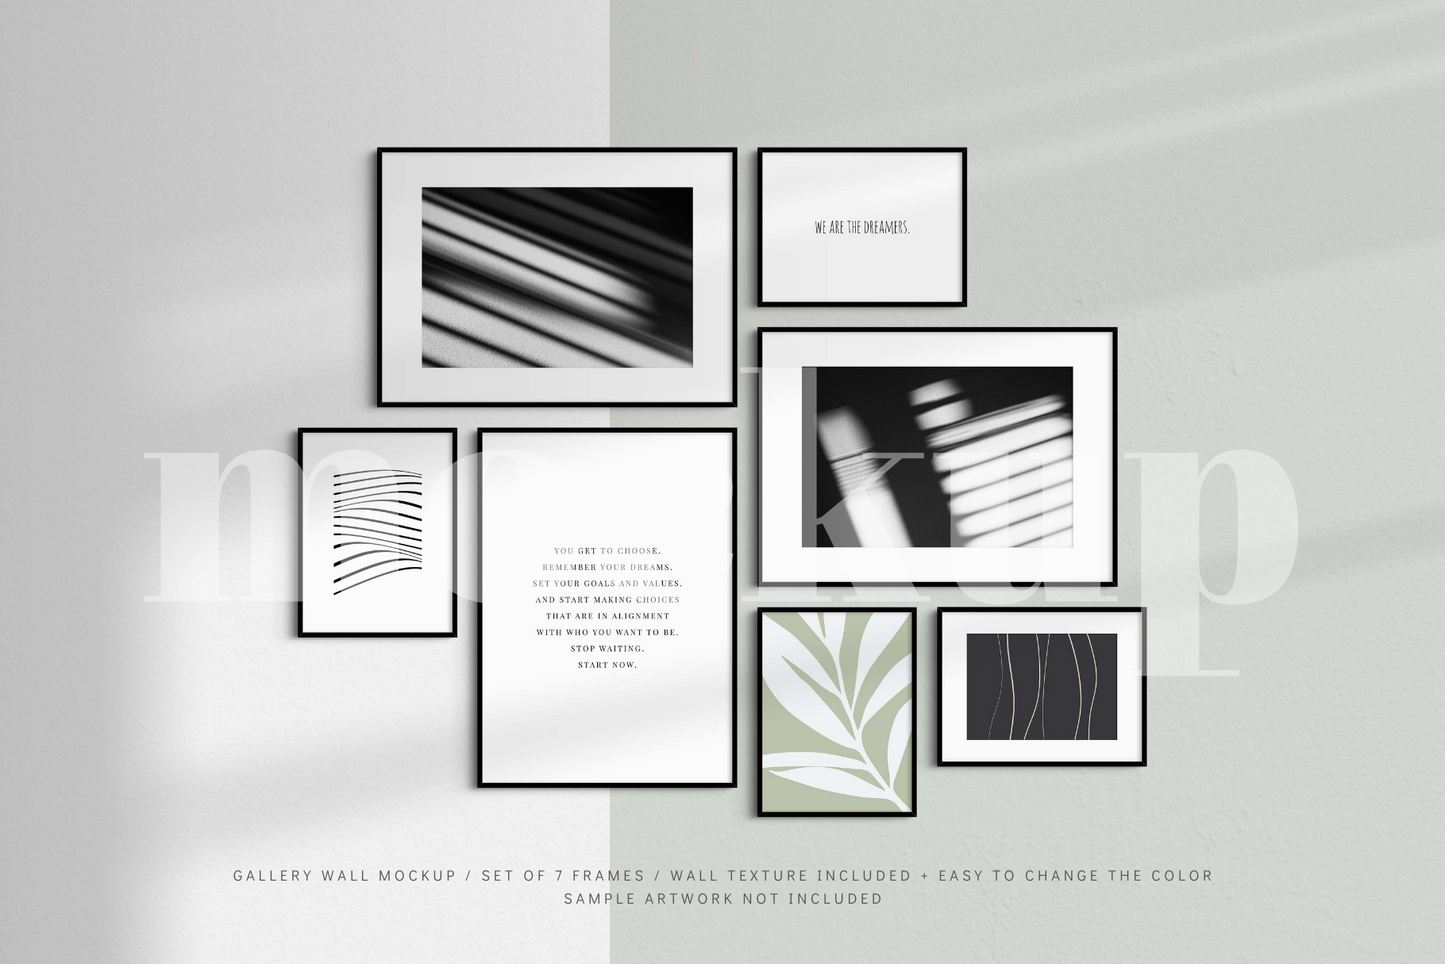 A modern, minimalist gallery wall mockup that features a set of 7 thin black frames.